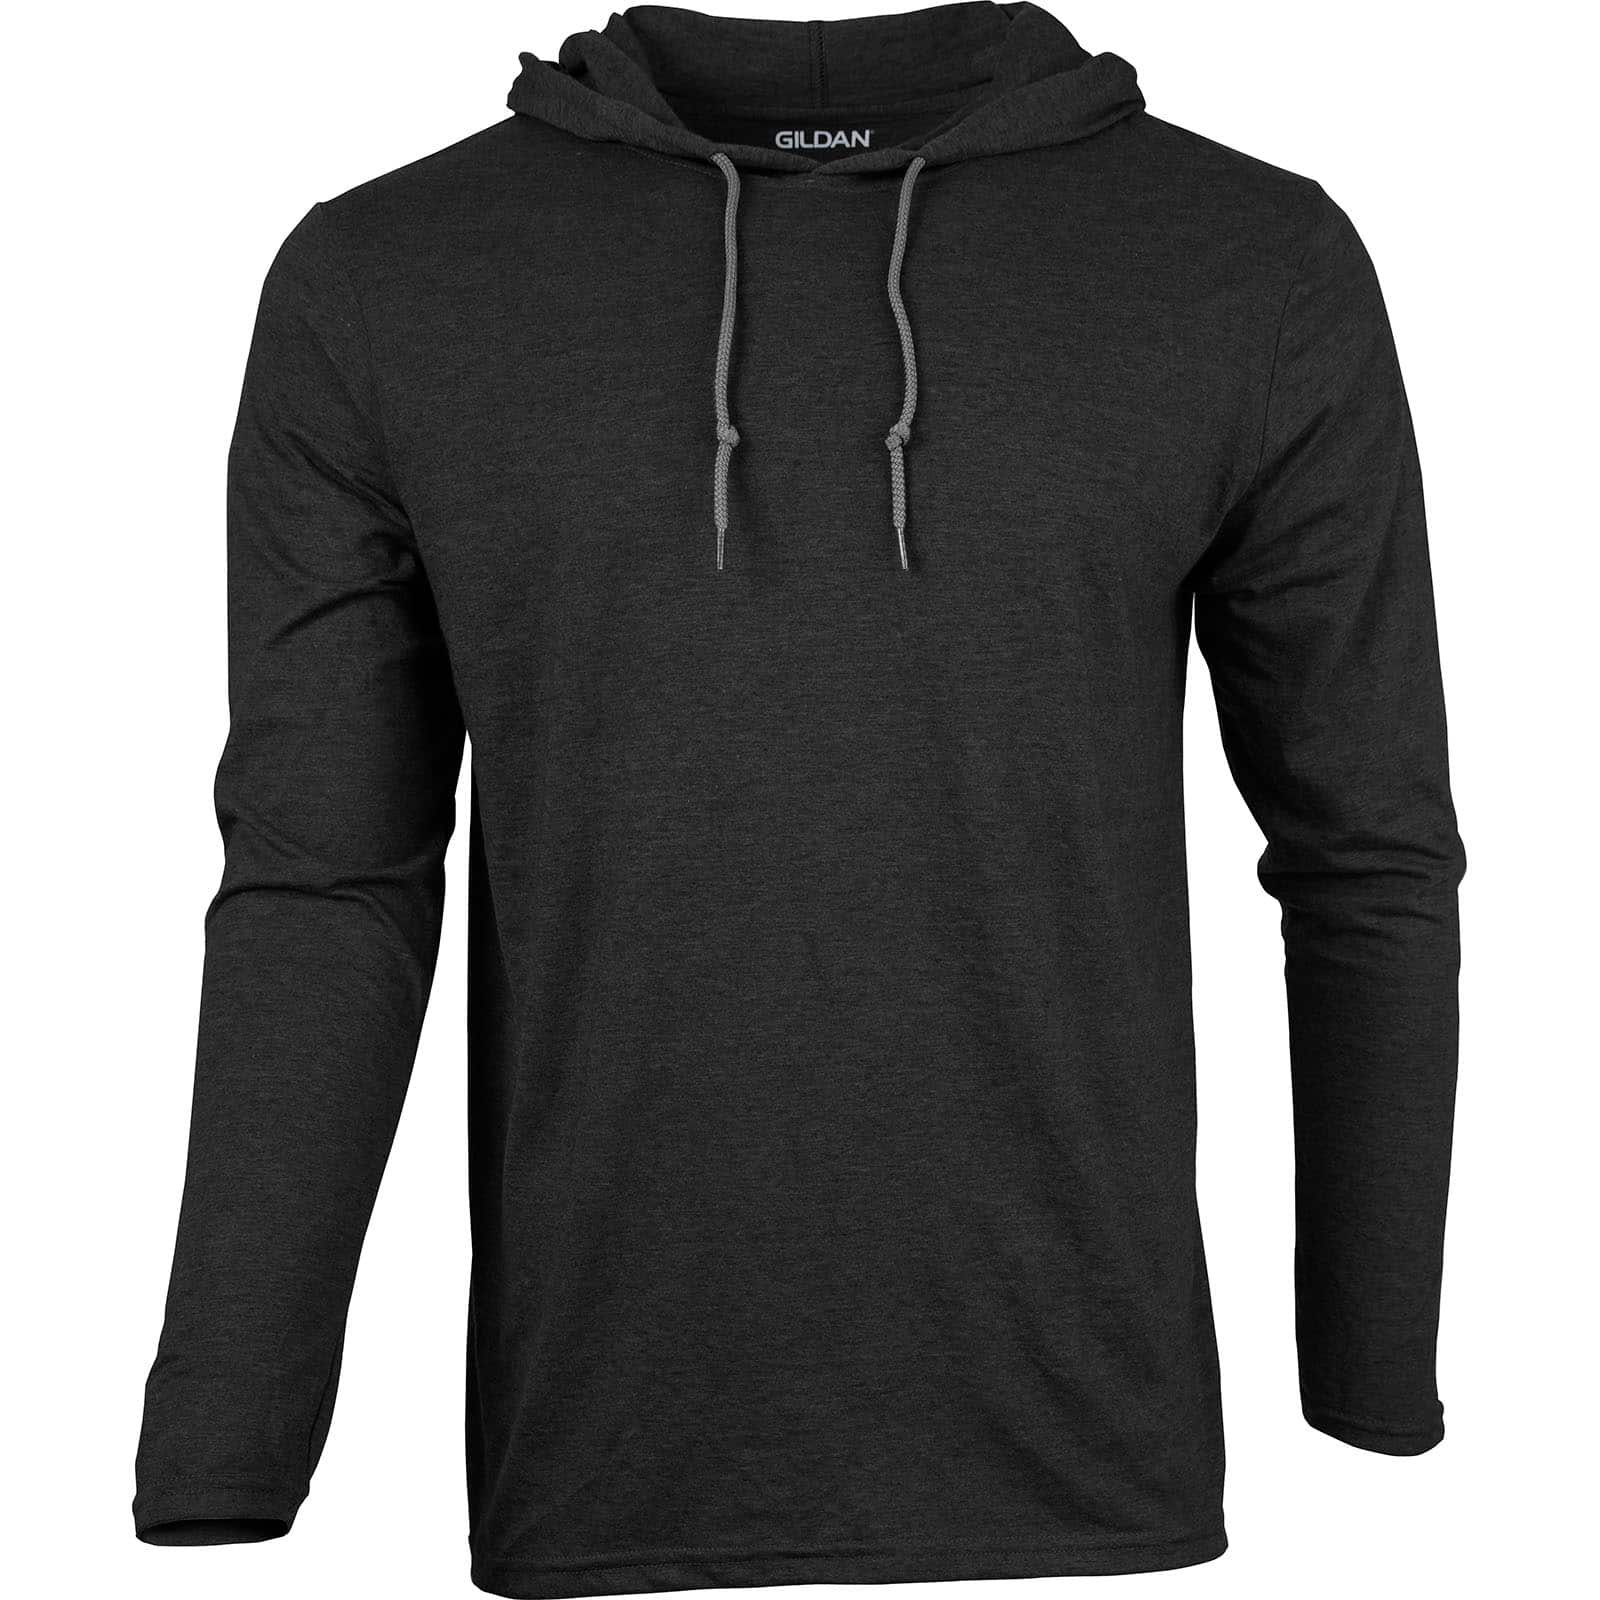 Shop for the Gildan® Adult Hooded T-Shirt at Michaels